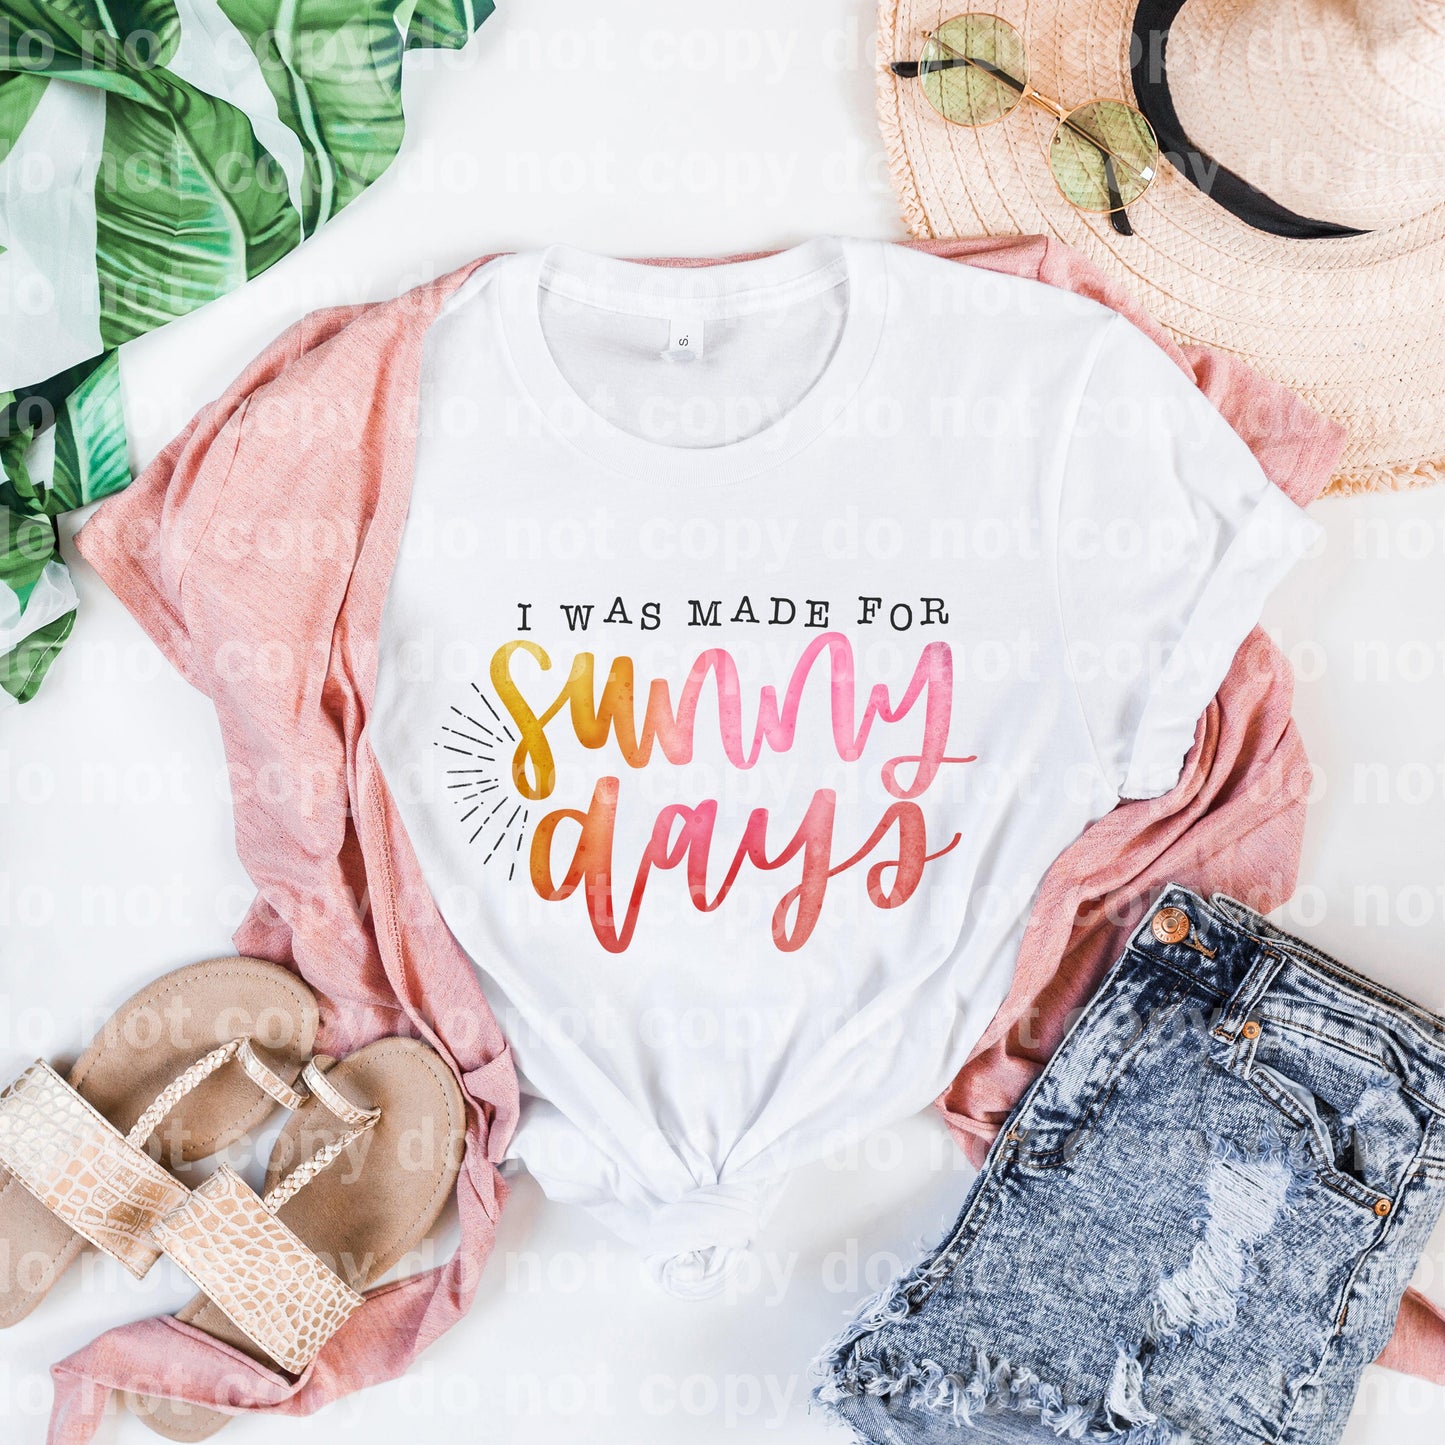 I Was Made For Sunny Days Typography Sublimation print